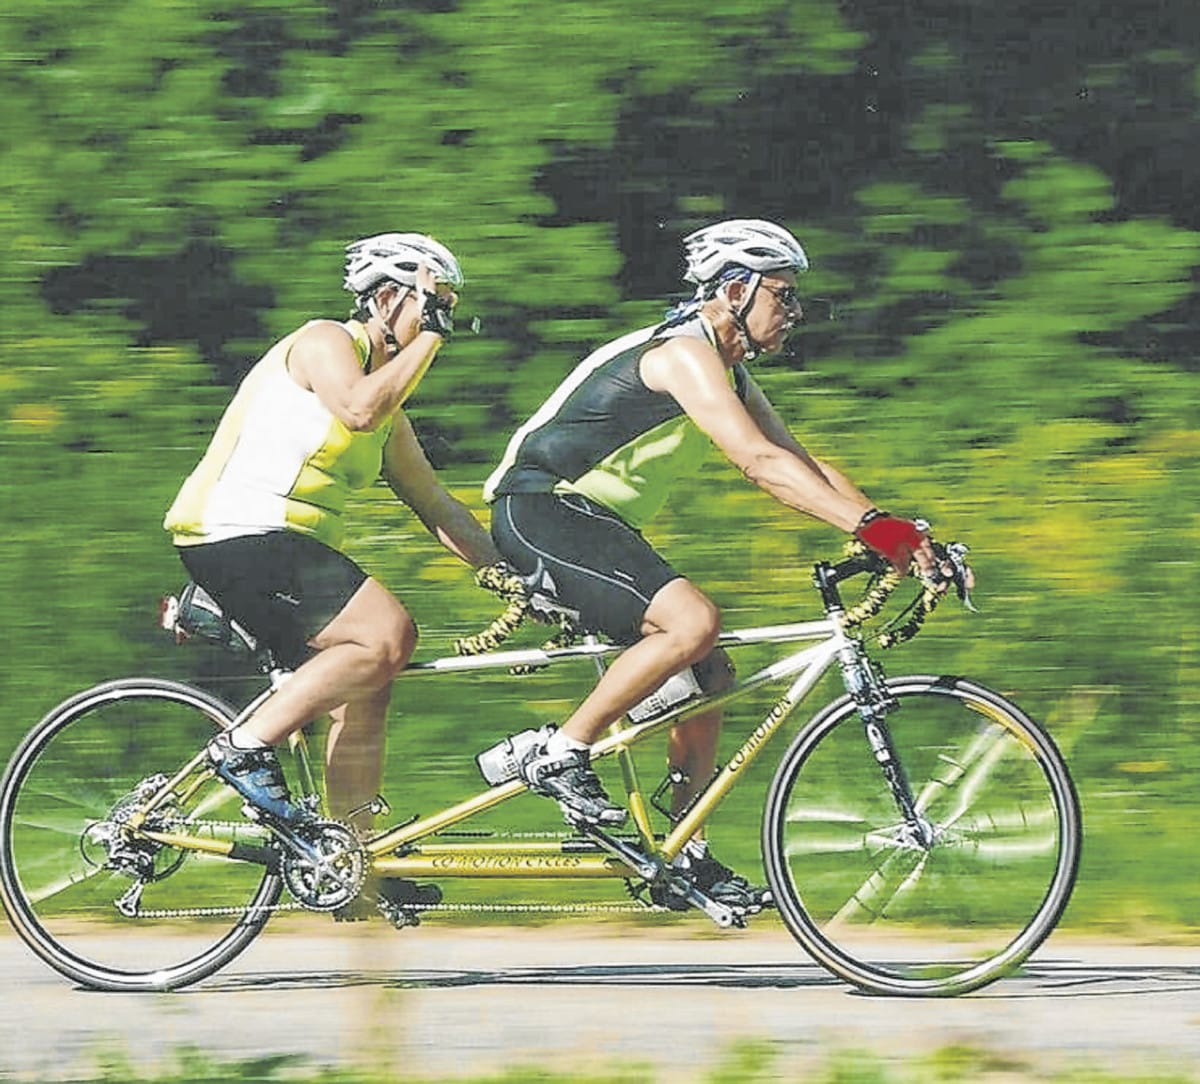 Sheldon and Martha Hall prefer riding a tandem bicycle rather than two separate bikes during their journeys. They like the closeness they share when they’re aboard a two-seater.